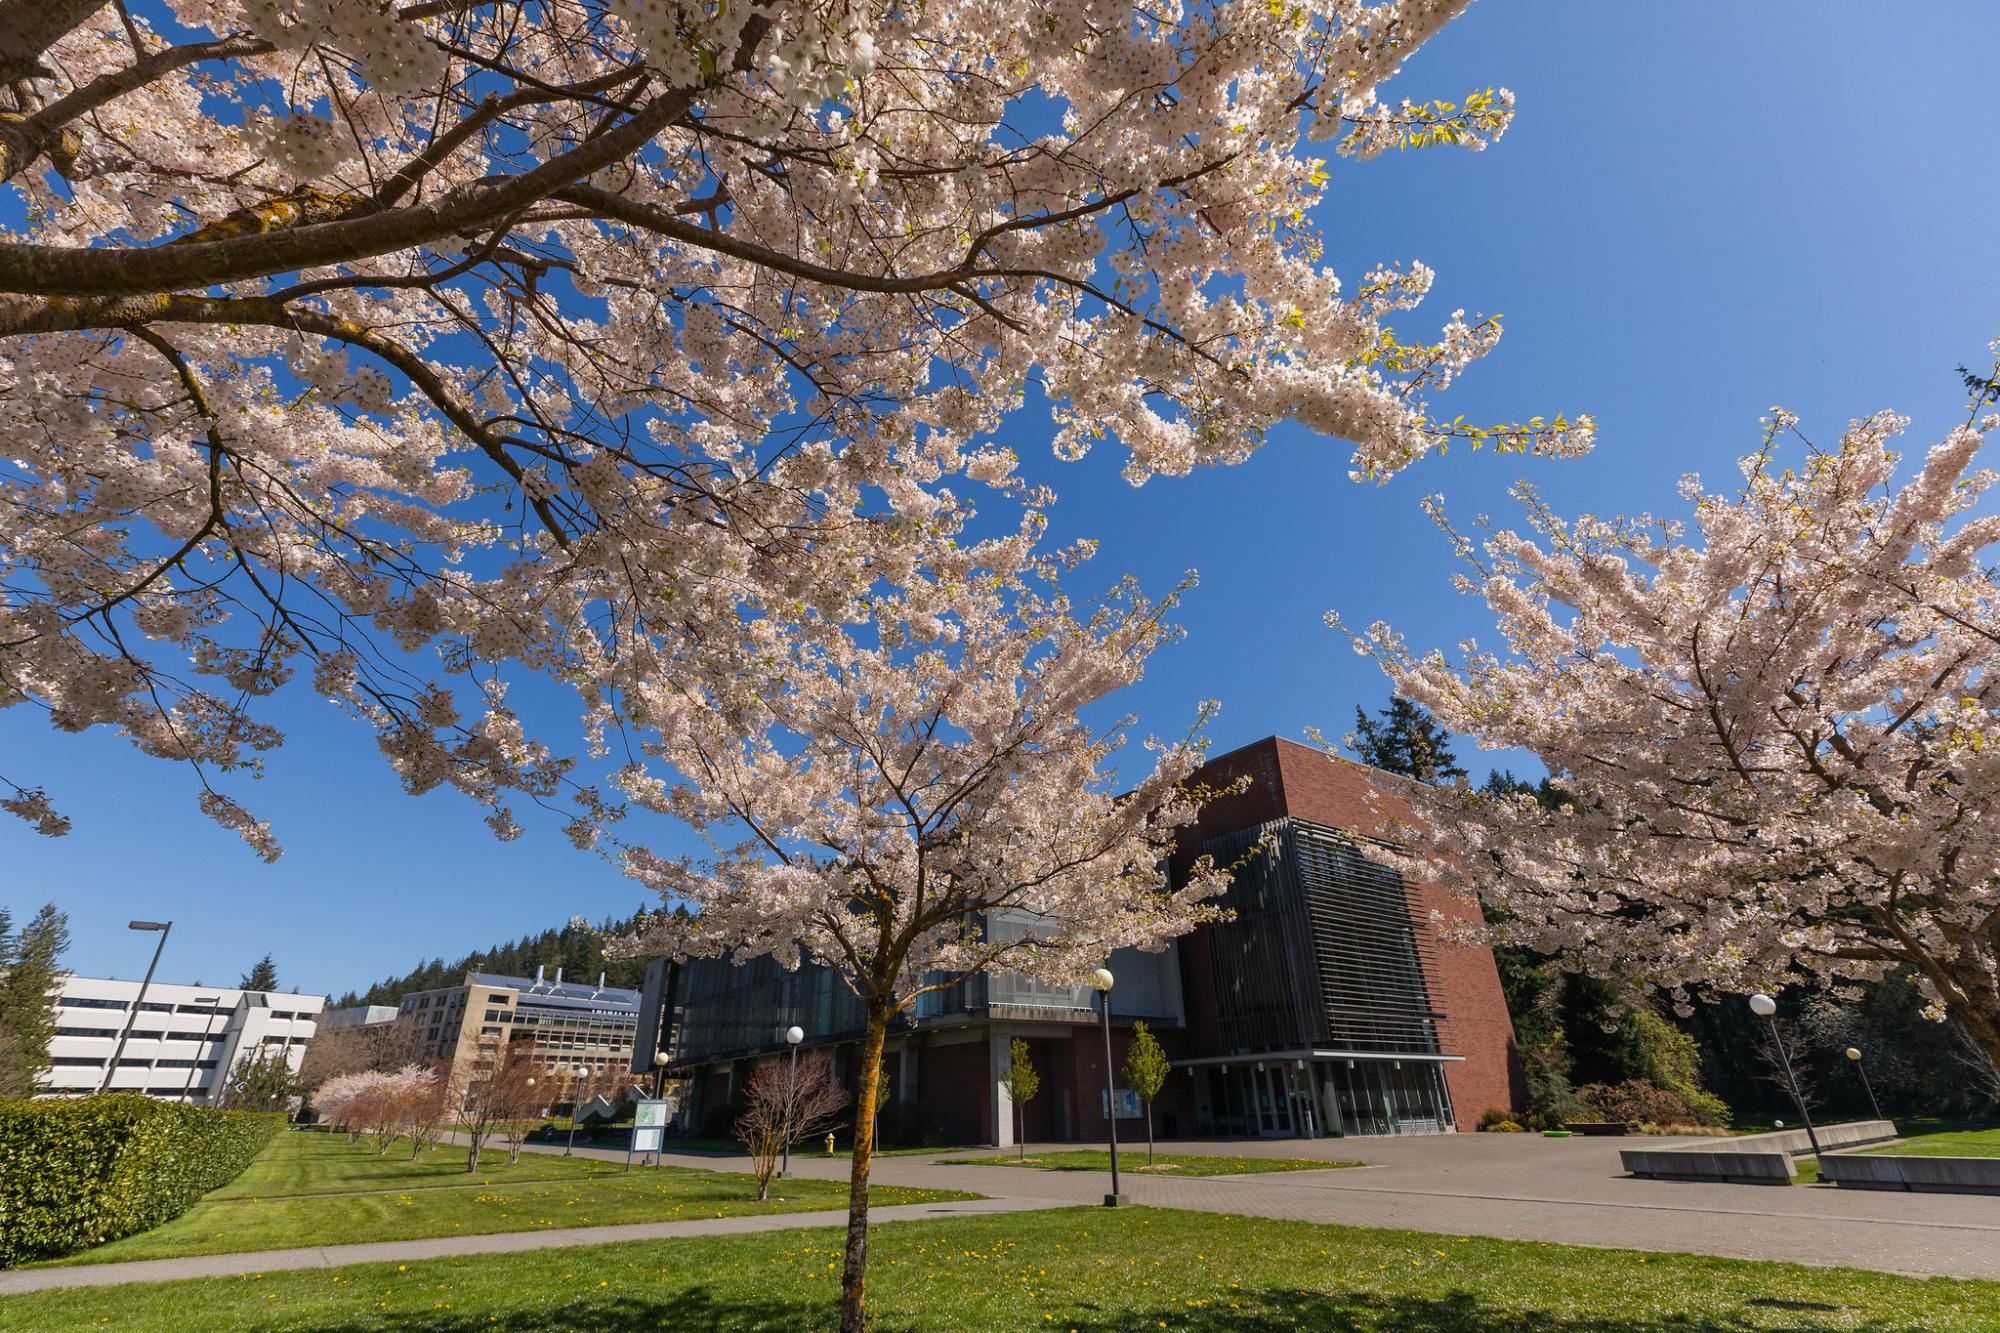 View from underneath cherry trees in bloom during spring on south campus at Western facing AW